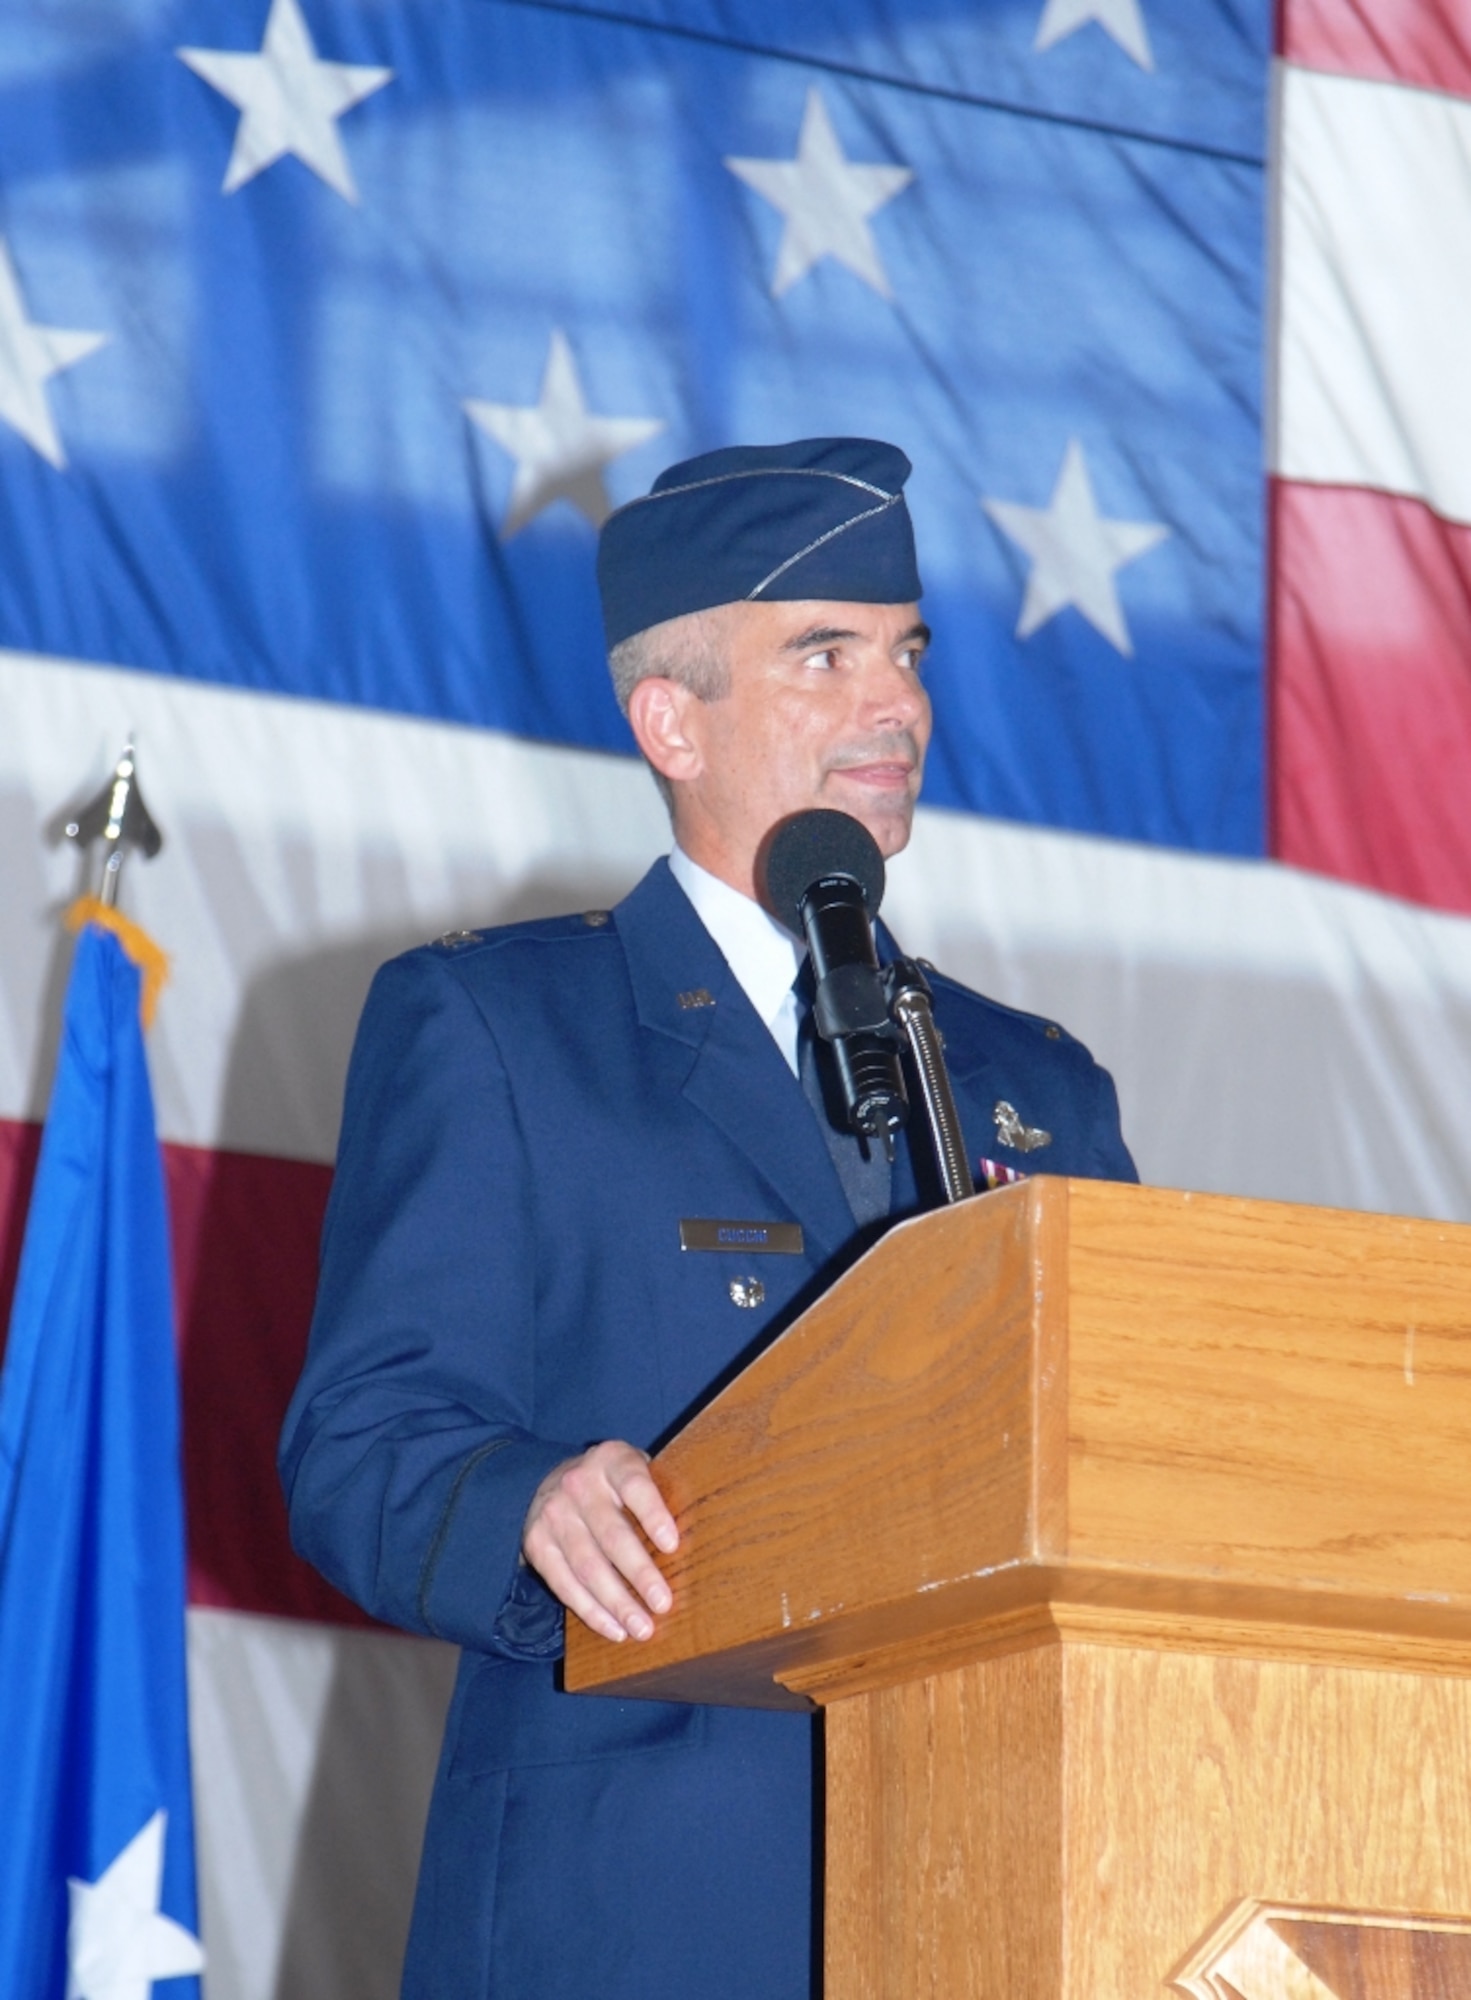 U.S. Air Force Col. Thomas Cucchi addresses members of 101st Air & Space Operations Group (101st AOG) for the first time as the new commander of the 101st AOG during a change of command ceremony held here June 11, 2011.  This was the very first change of command ceremony for the 101st AOG, which was officially activated July 1, 2009. (U.S. Air Force photo by Maj. Steve Burke/Released)